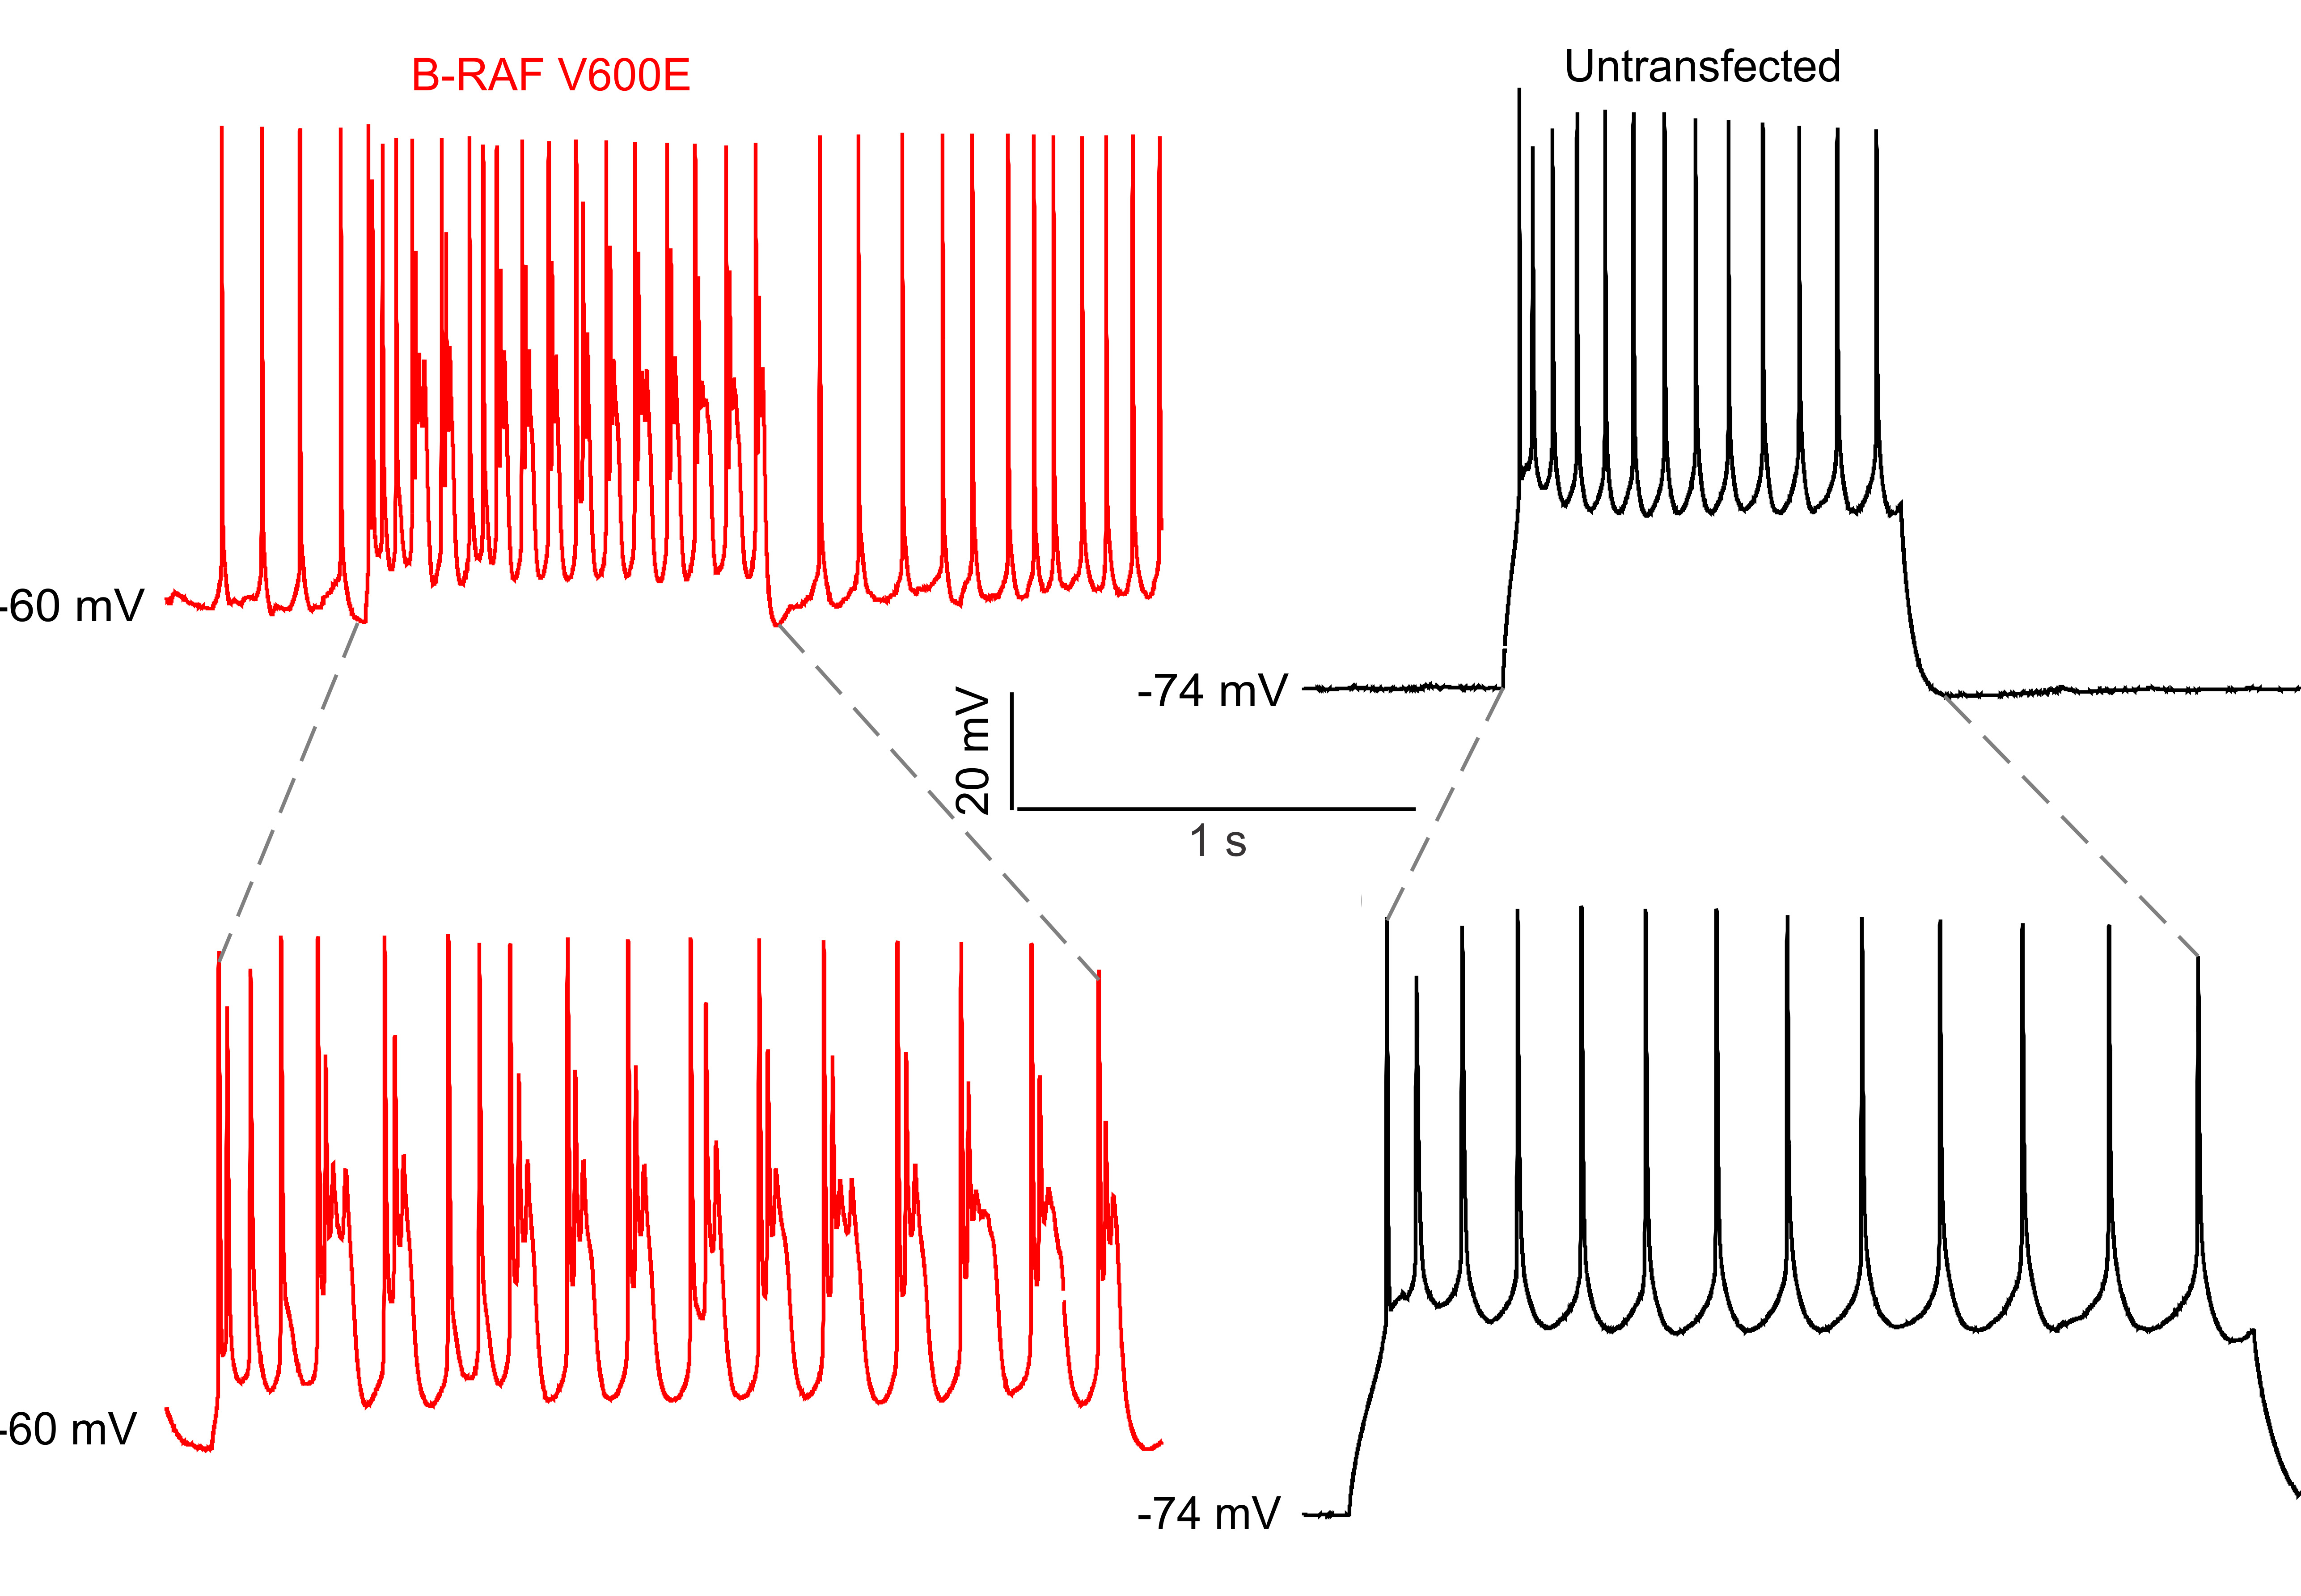 Image of Action Potentials in Control and BRAFV600E conditions.